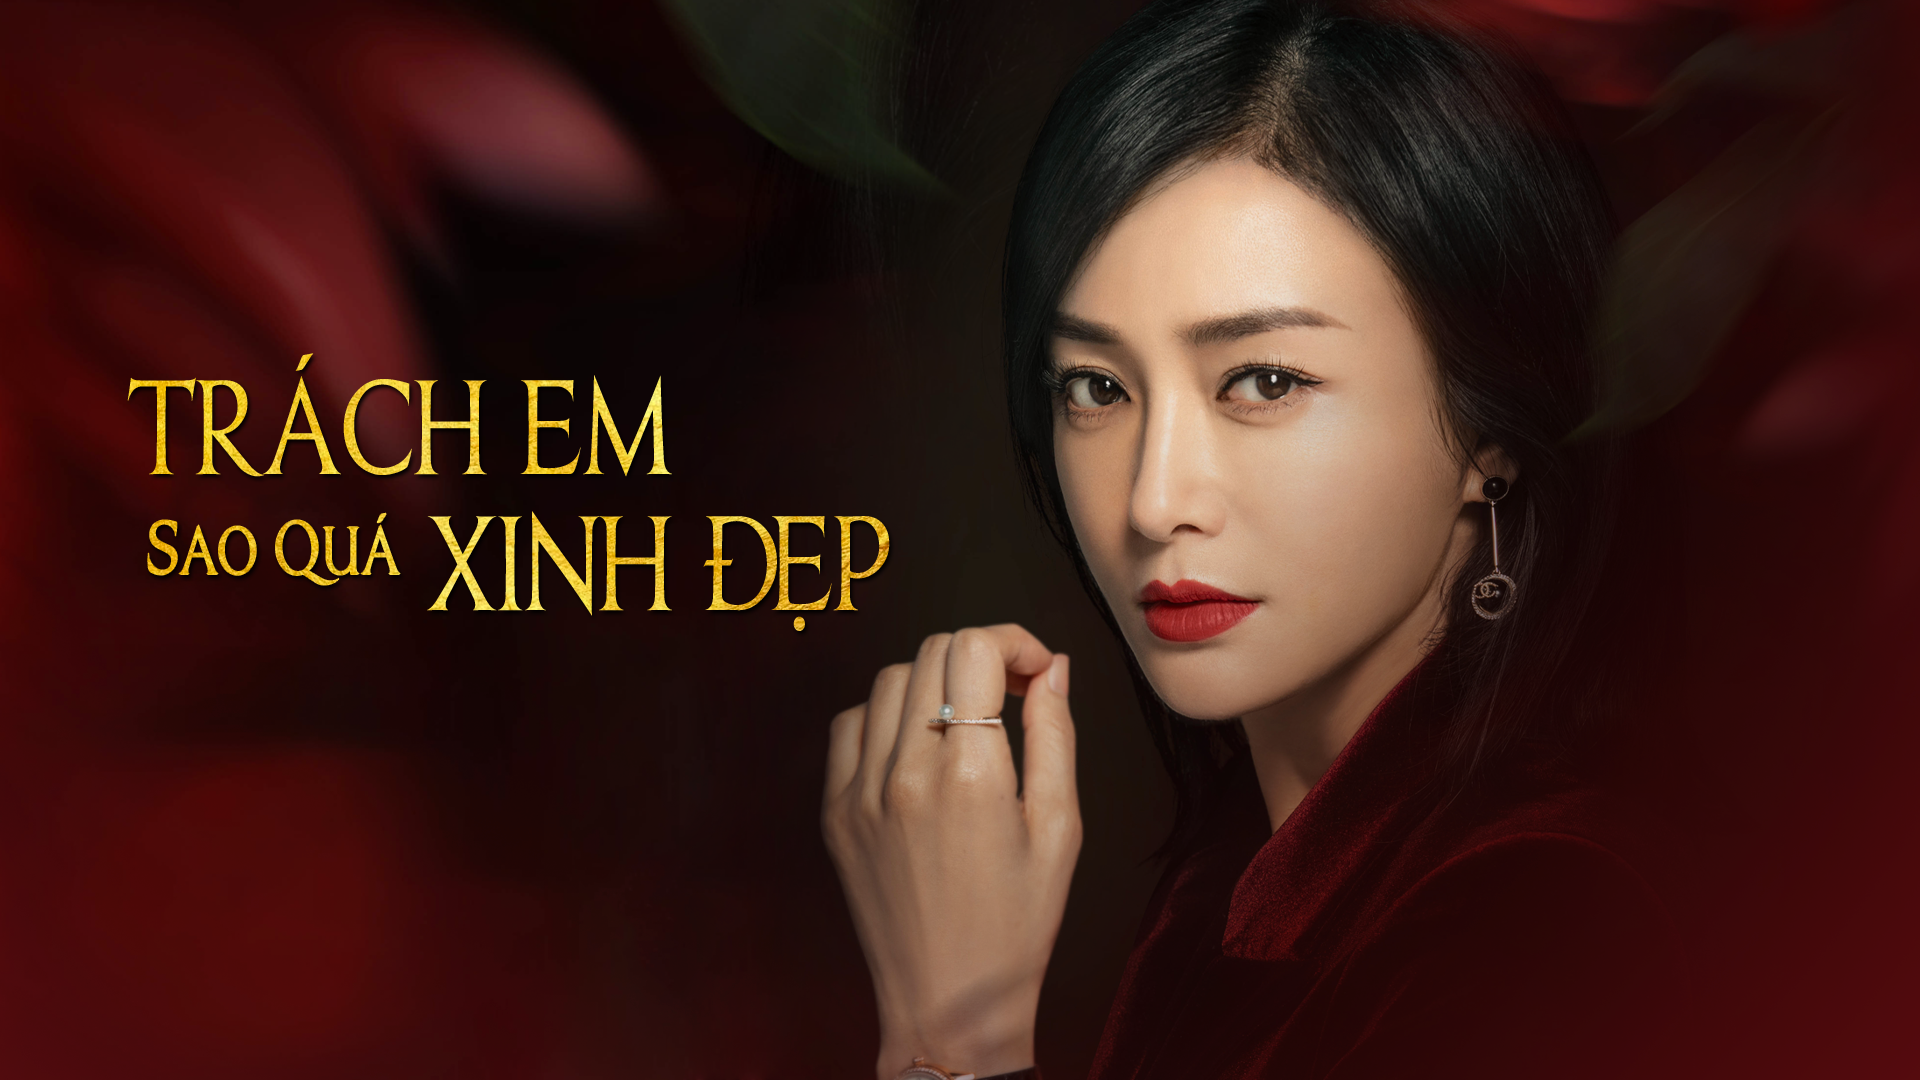 What is the storyline and cast of the Chinese drama Trách Em Sao Quá Xinh Đẹp?